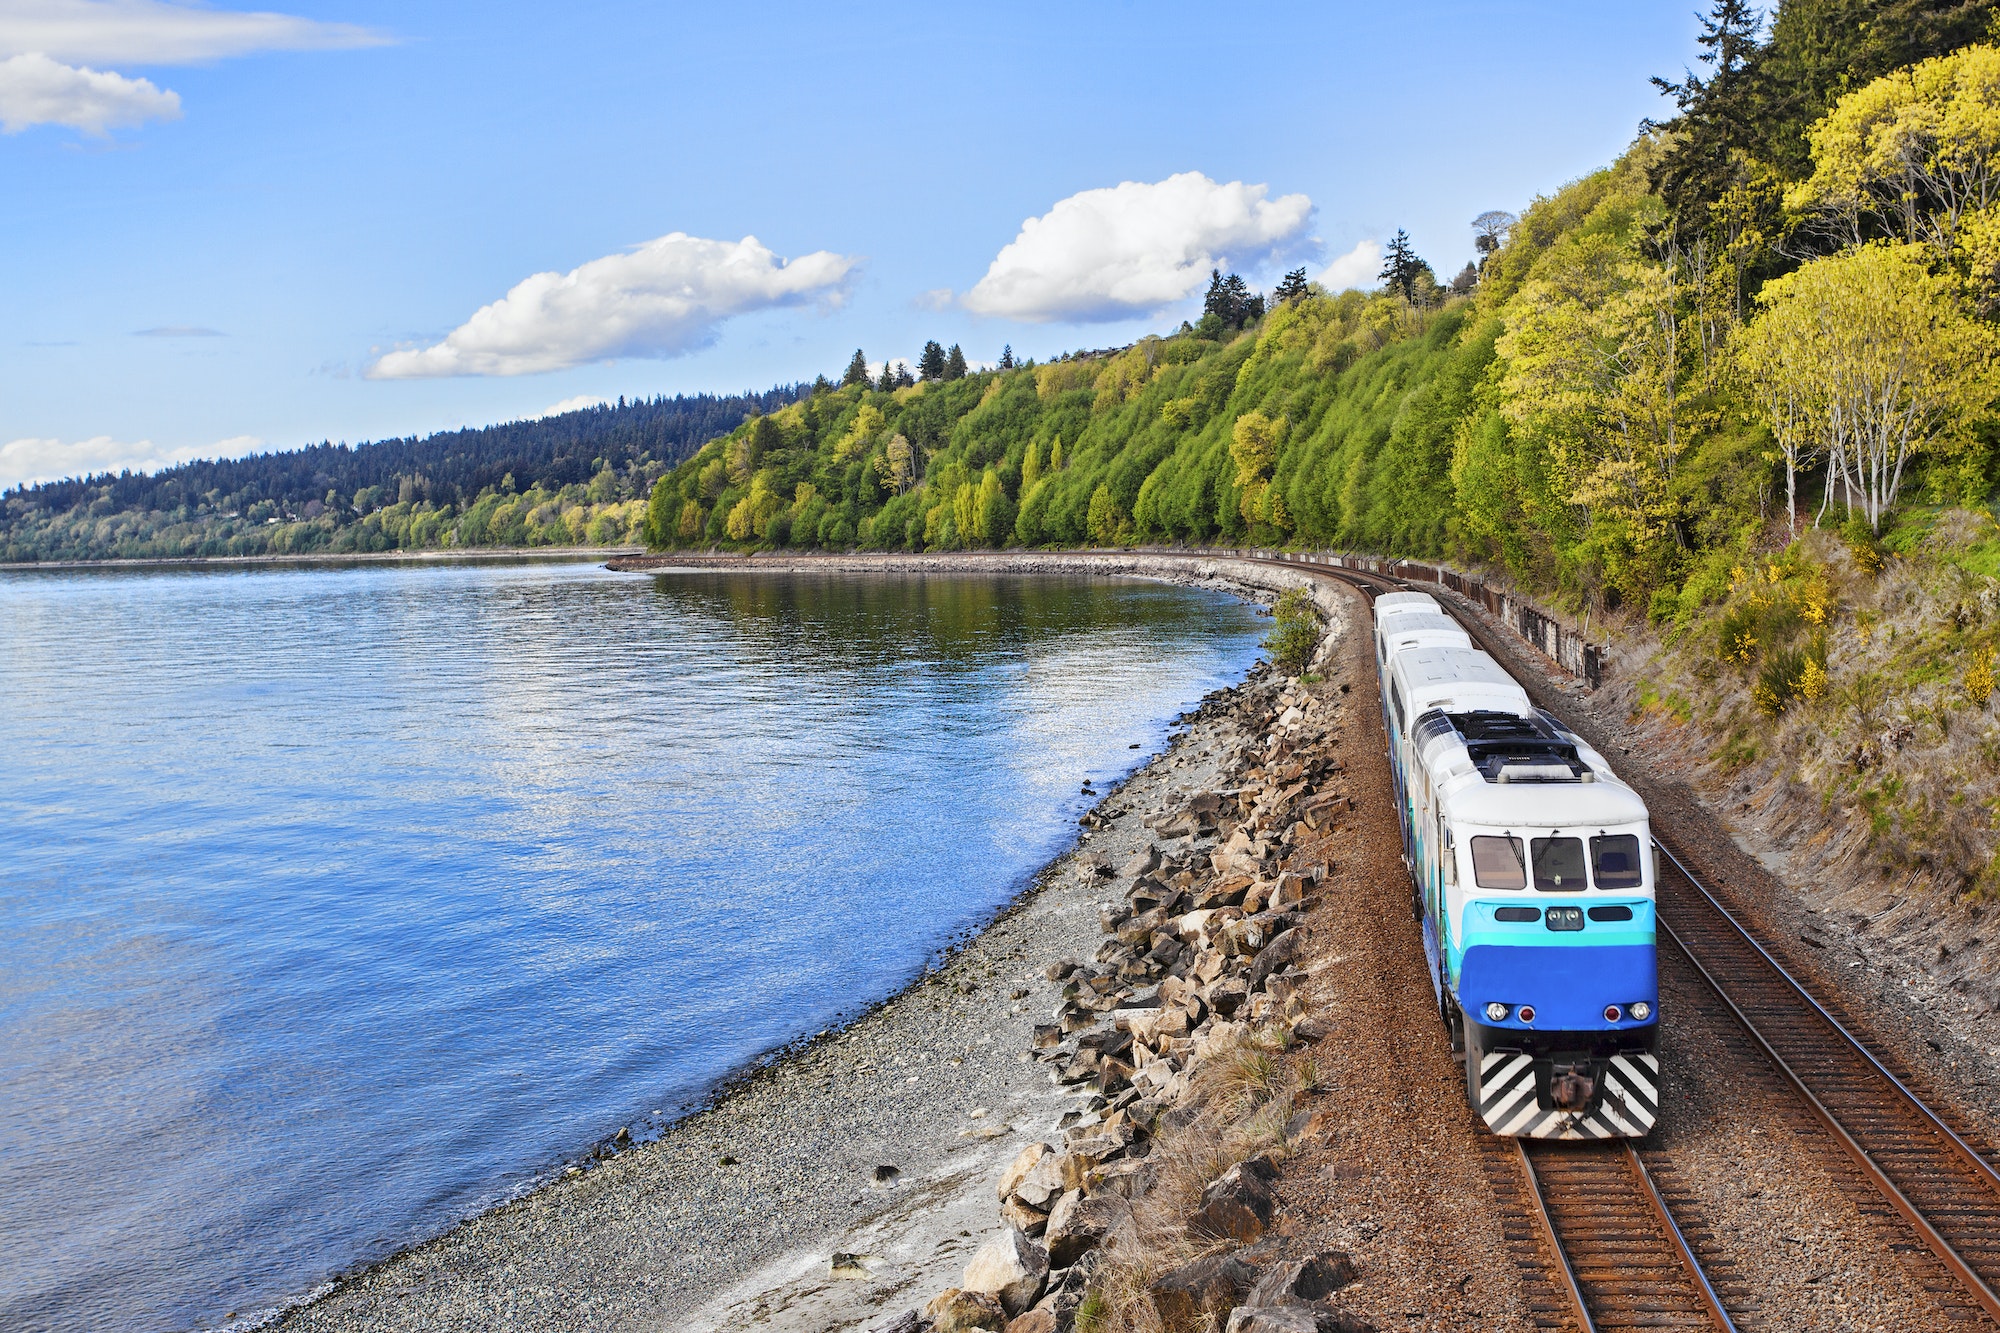 55292,Commuter train on tracks at waterfront